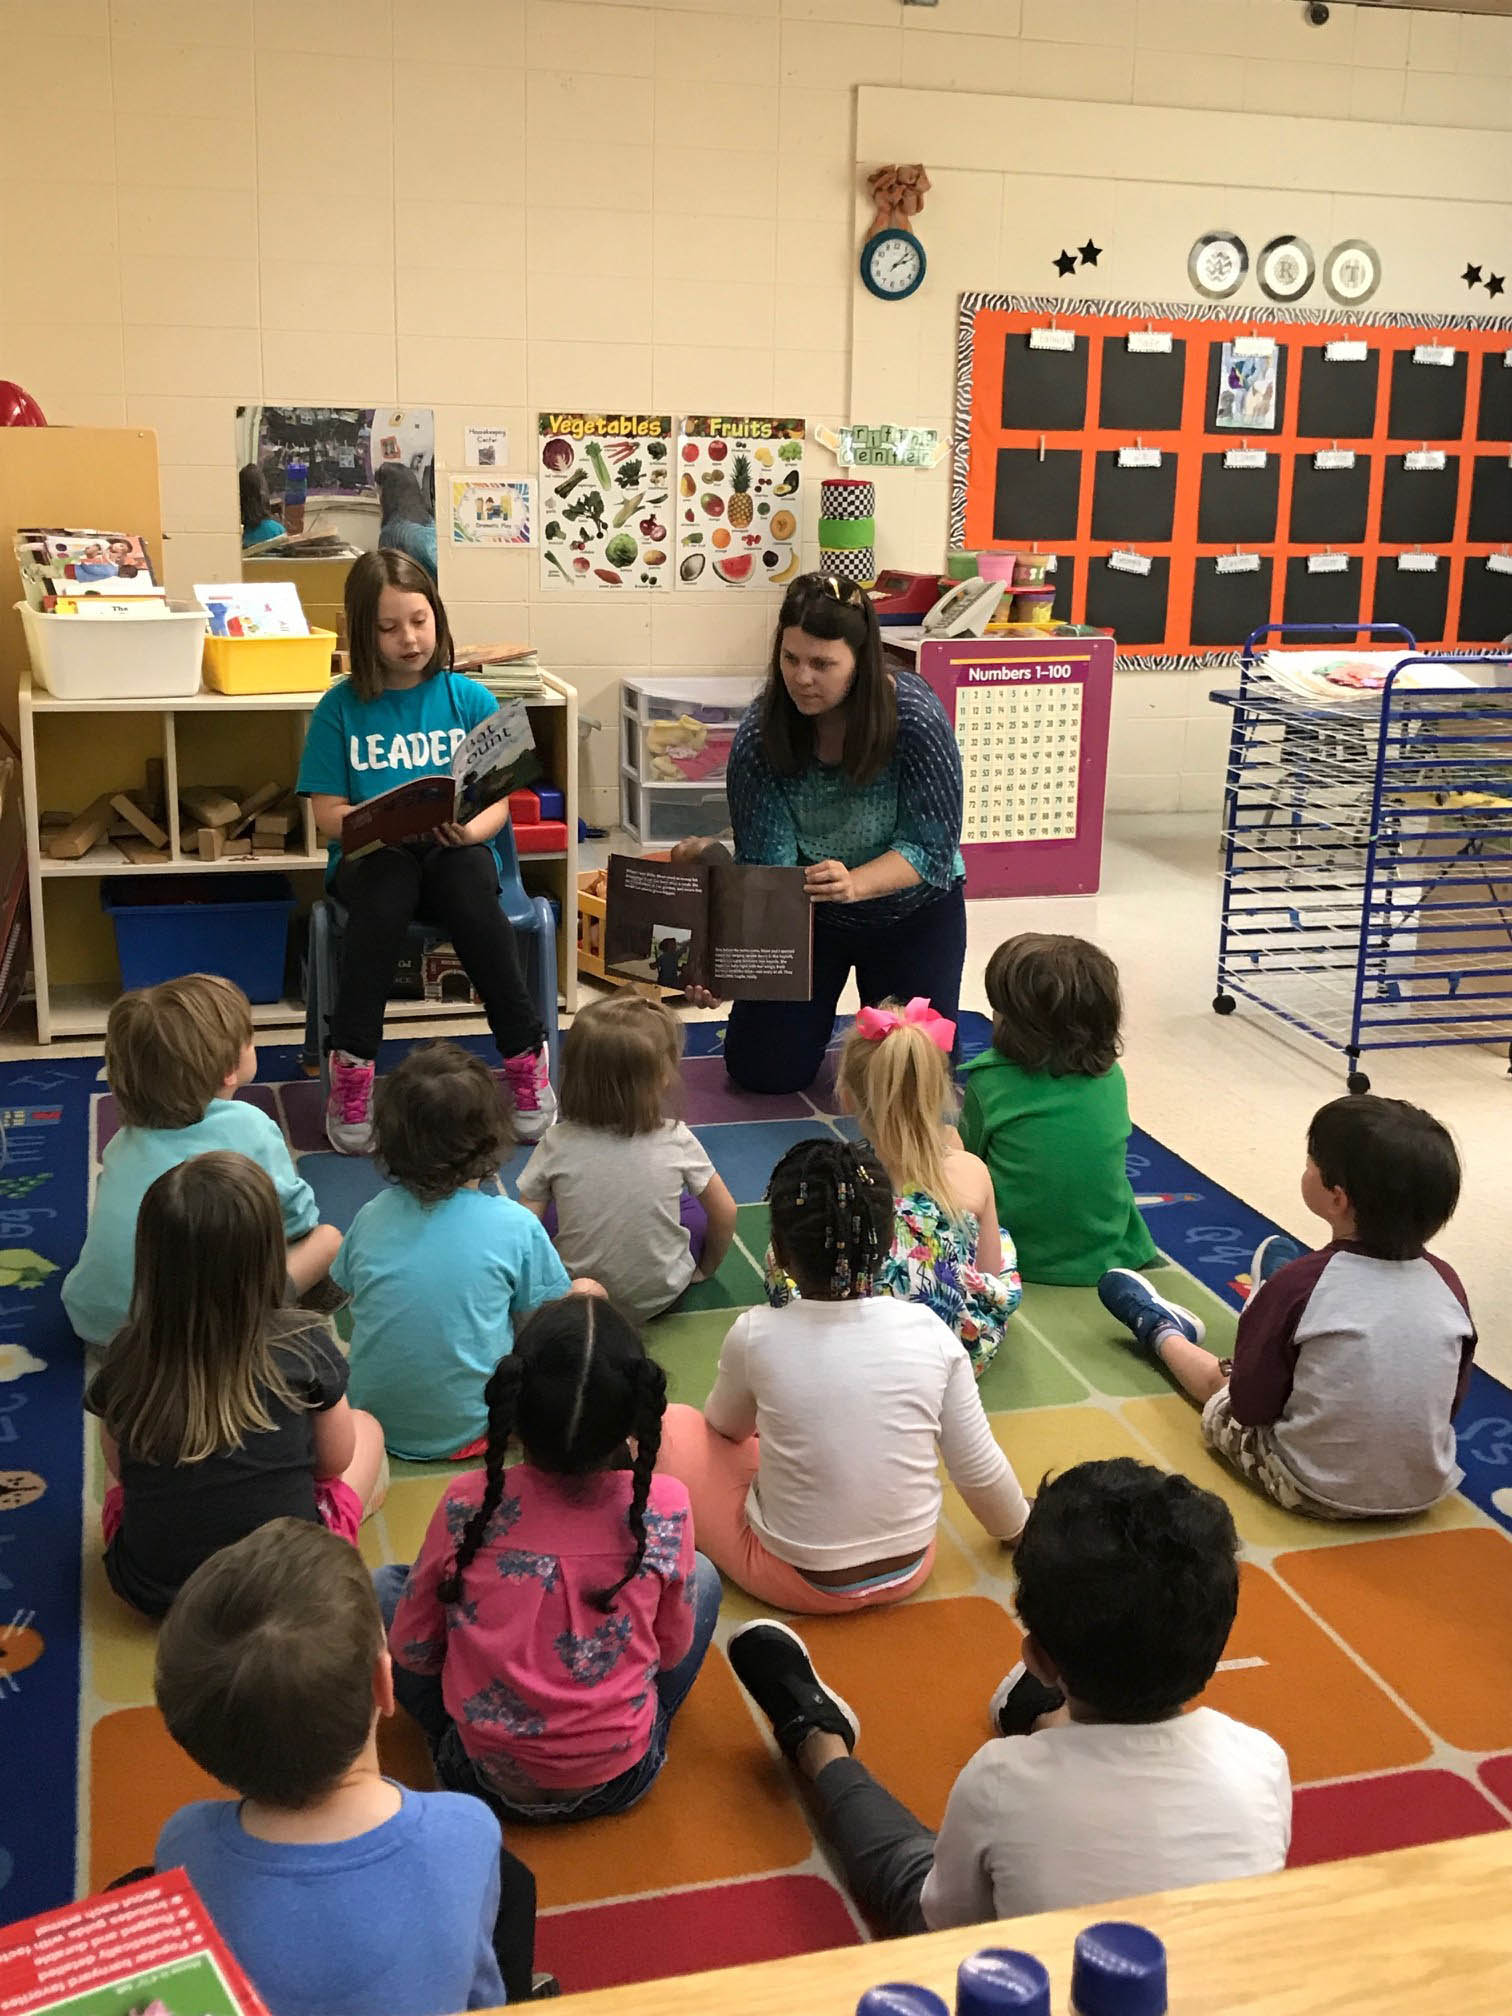 Amy Moe-Hoffman, Collections Manager and Giverny Exhibit Designer, reads the 2018 Giverny Award-winning book, Bat Count: A Citizen Science Story, as her daughter Margot Hoffman shows the illustrations to the students.